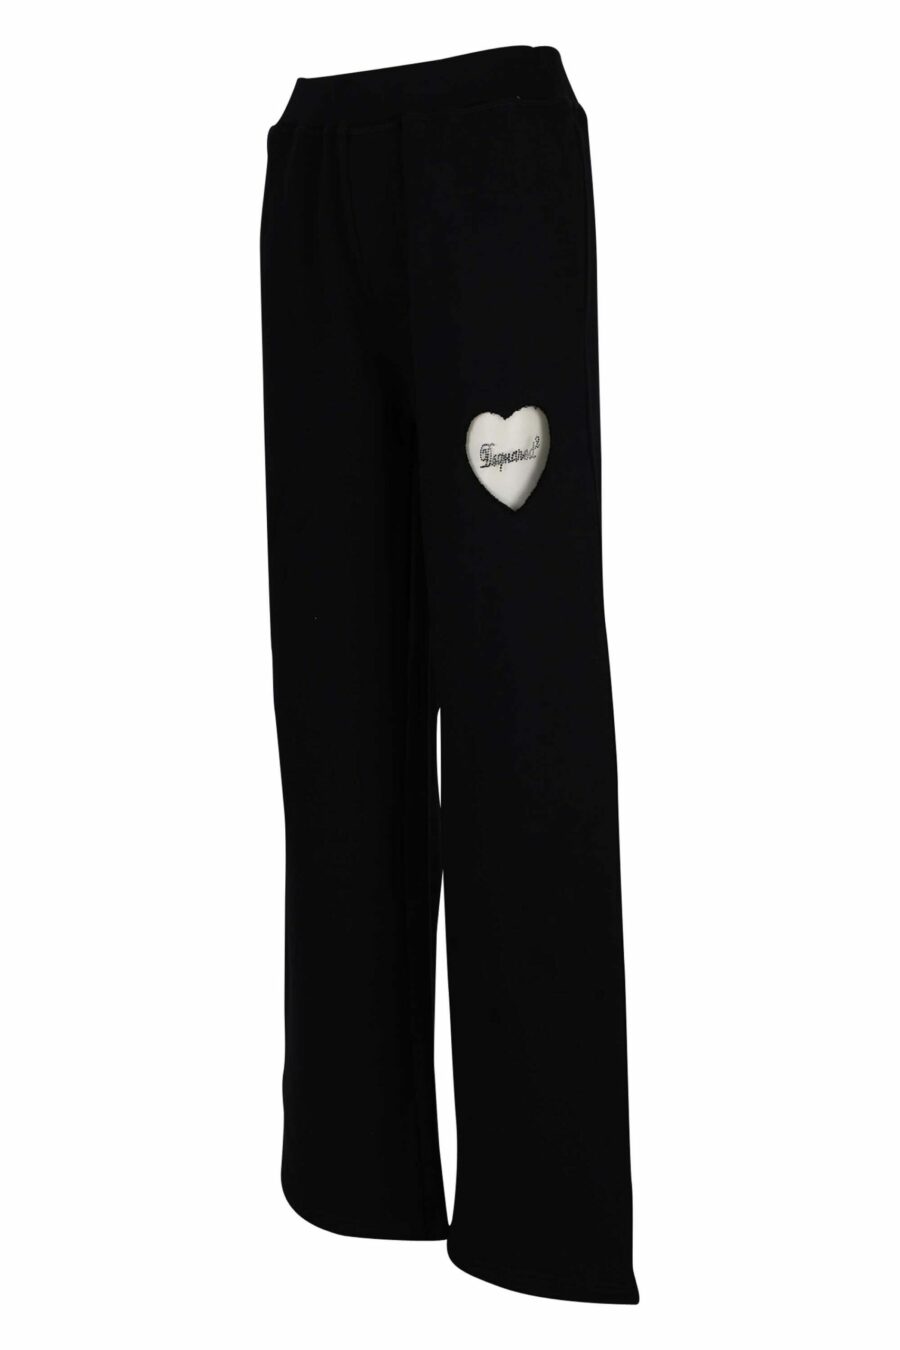 Black trousers with transparent heart logo - 8054148304249 1 scaled